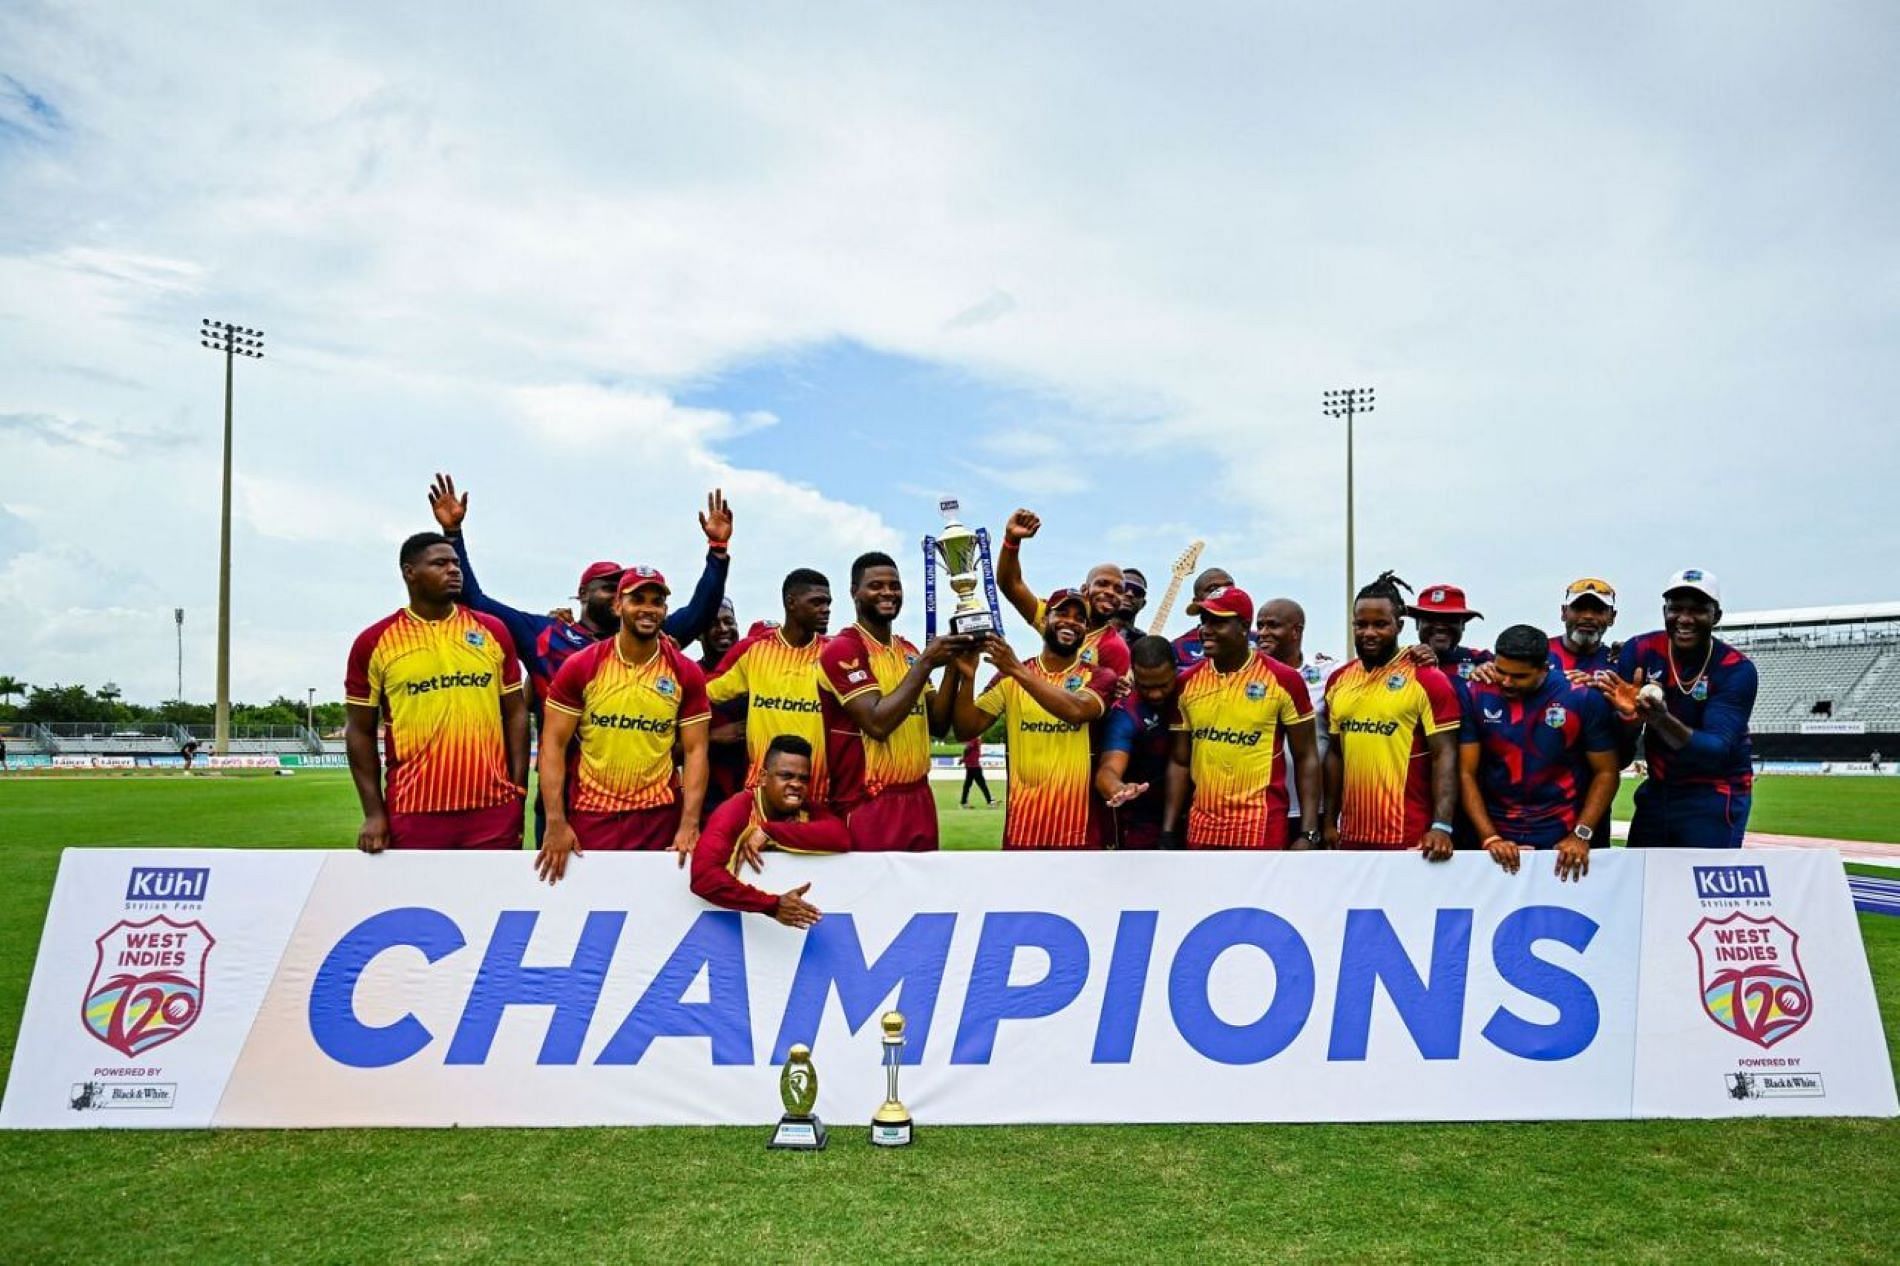 The Men from the Caribbean celebrate their monumental series win against India.